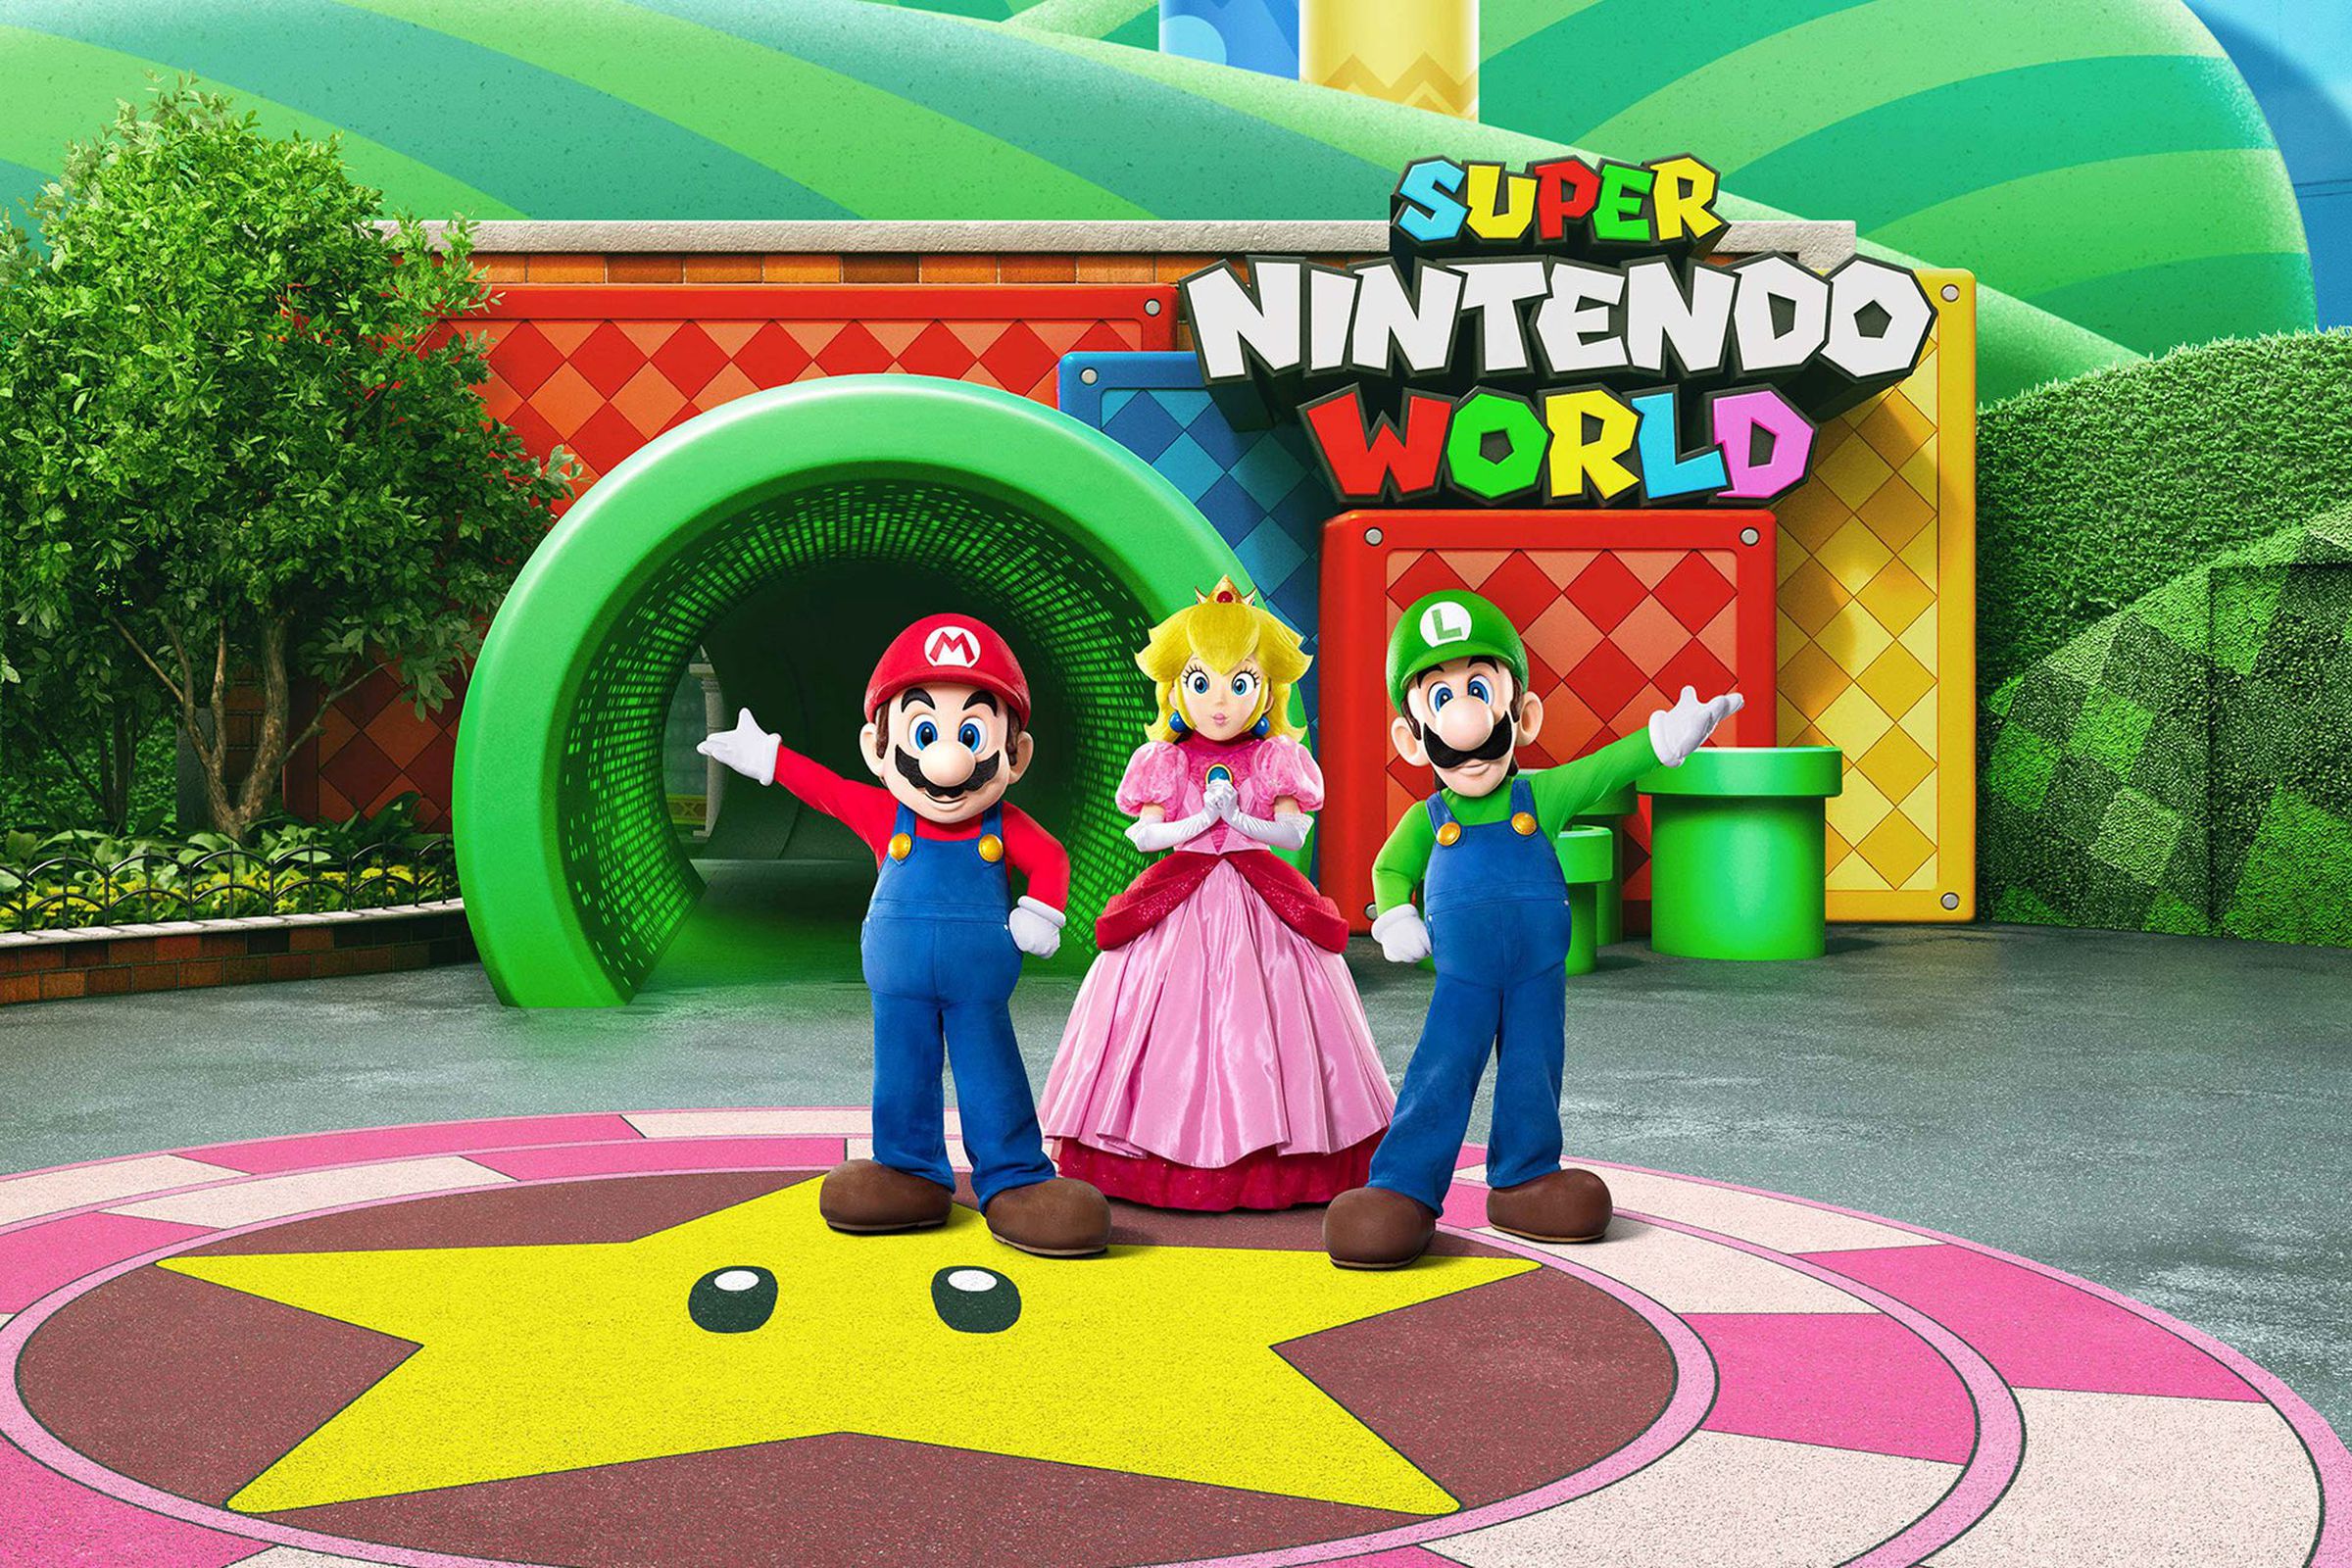 Image shows figures of Mario, Princess Peach, and Luigi standing in front of a life-size Mario tunnel and massive “Super Nintendo World” sign.